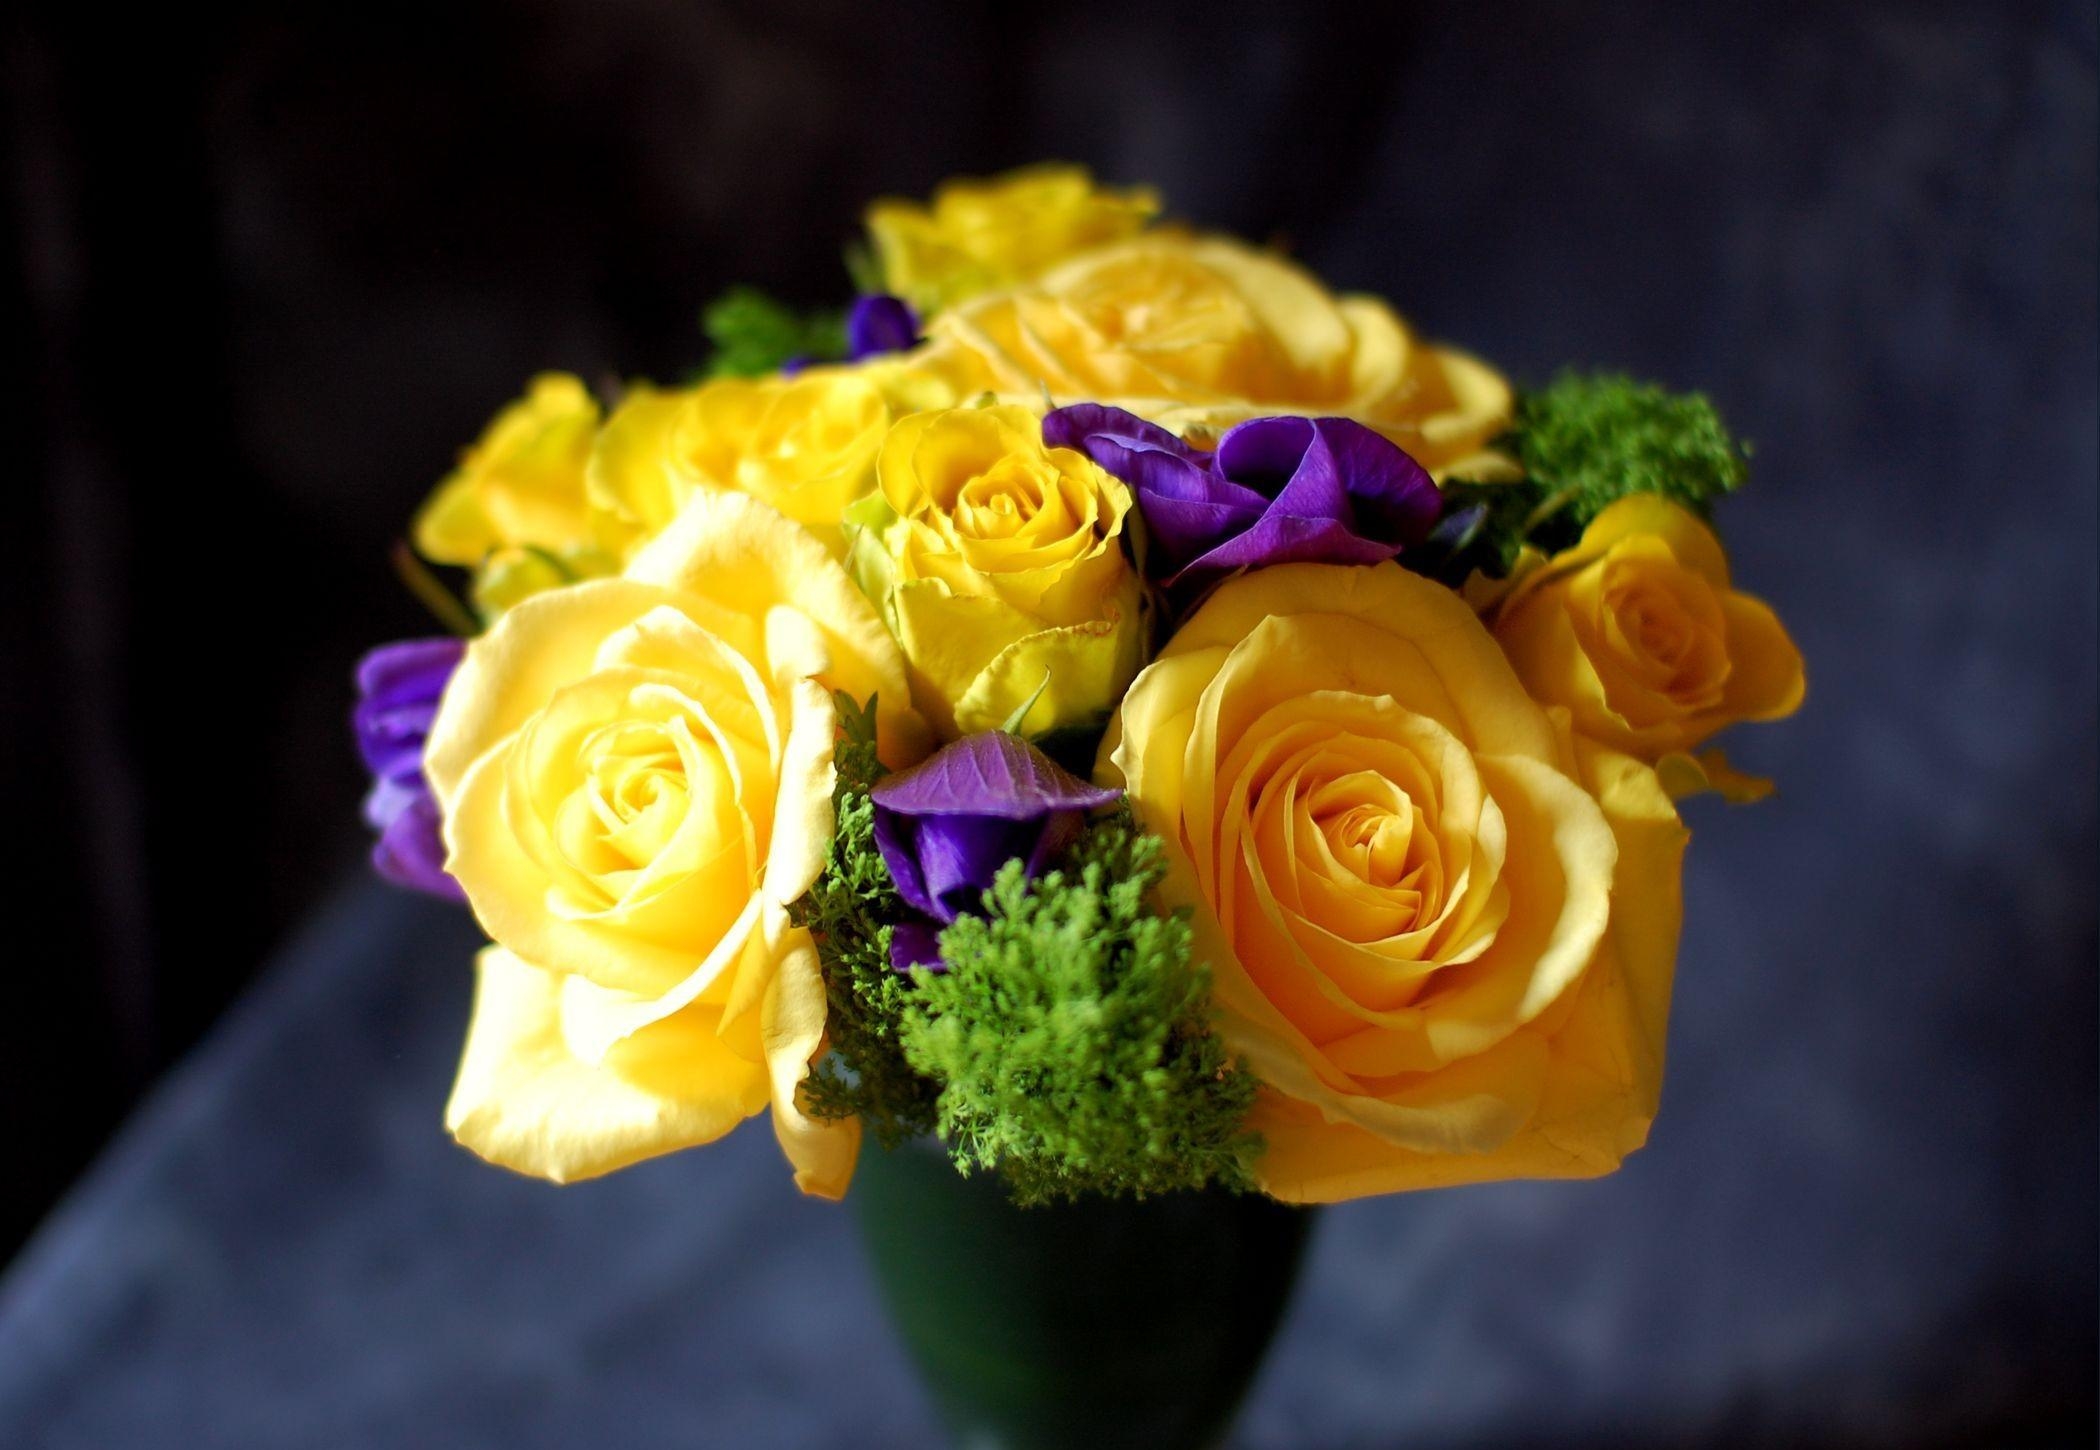 Free photo A beautiful bouquet of yellow roses